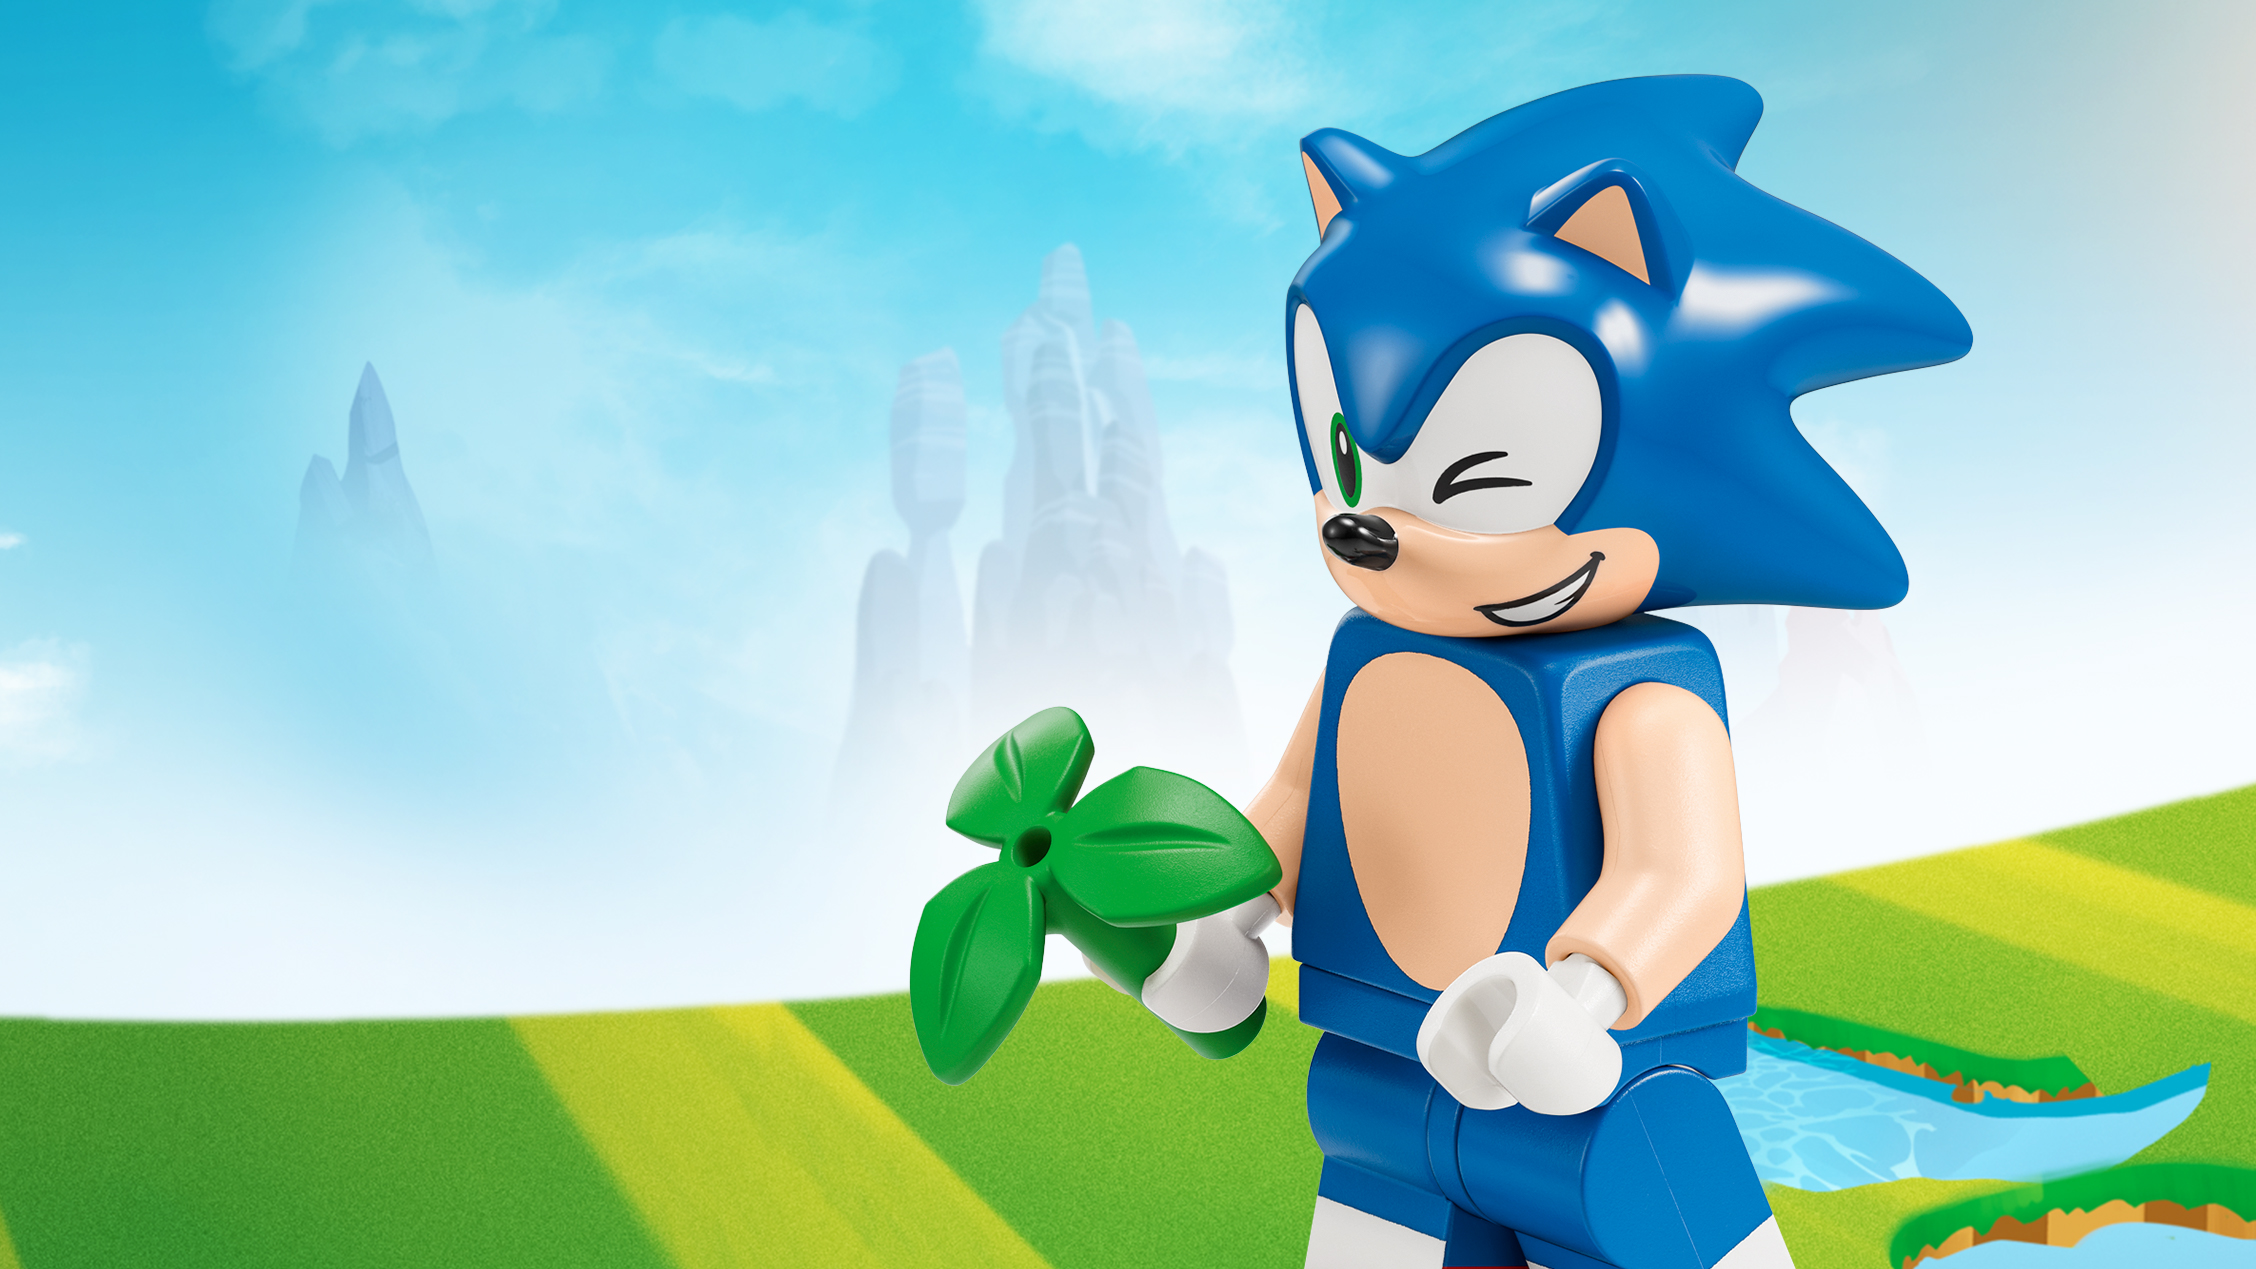 New image of Sonic the Hedgehog discovered, possibly for the